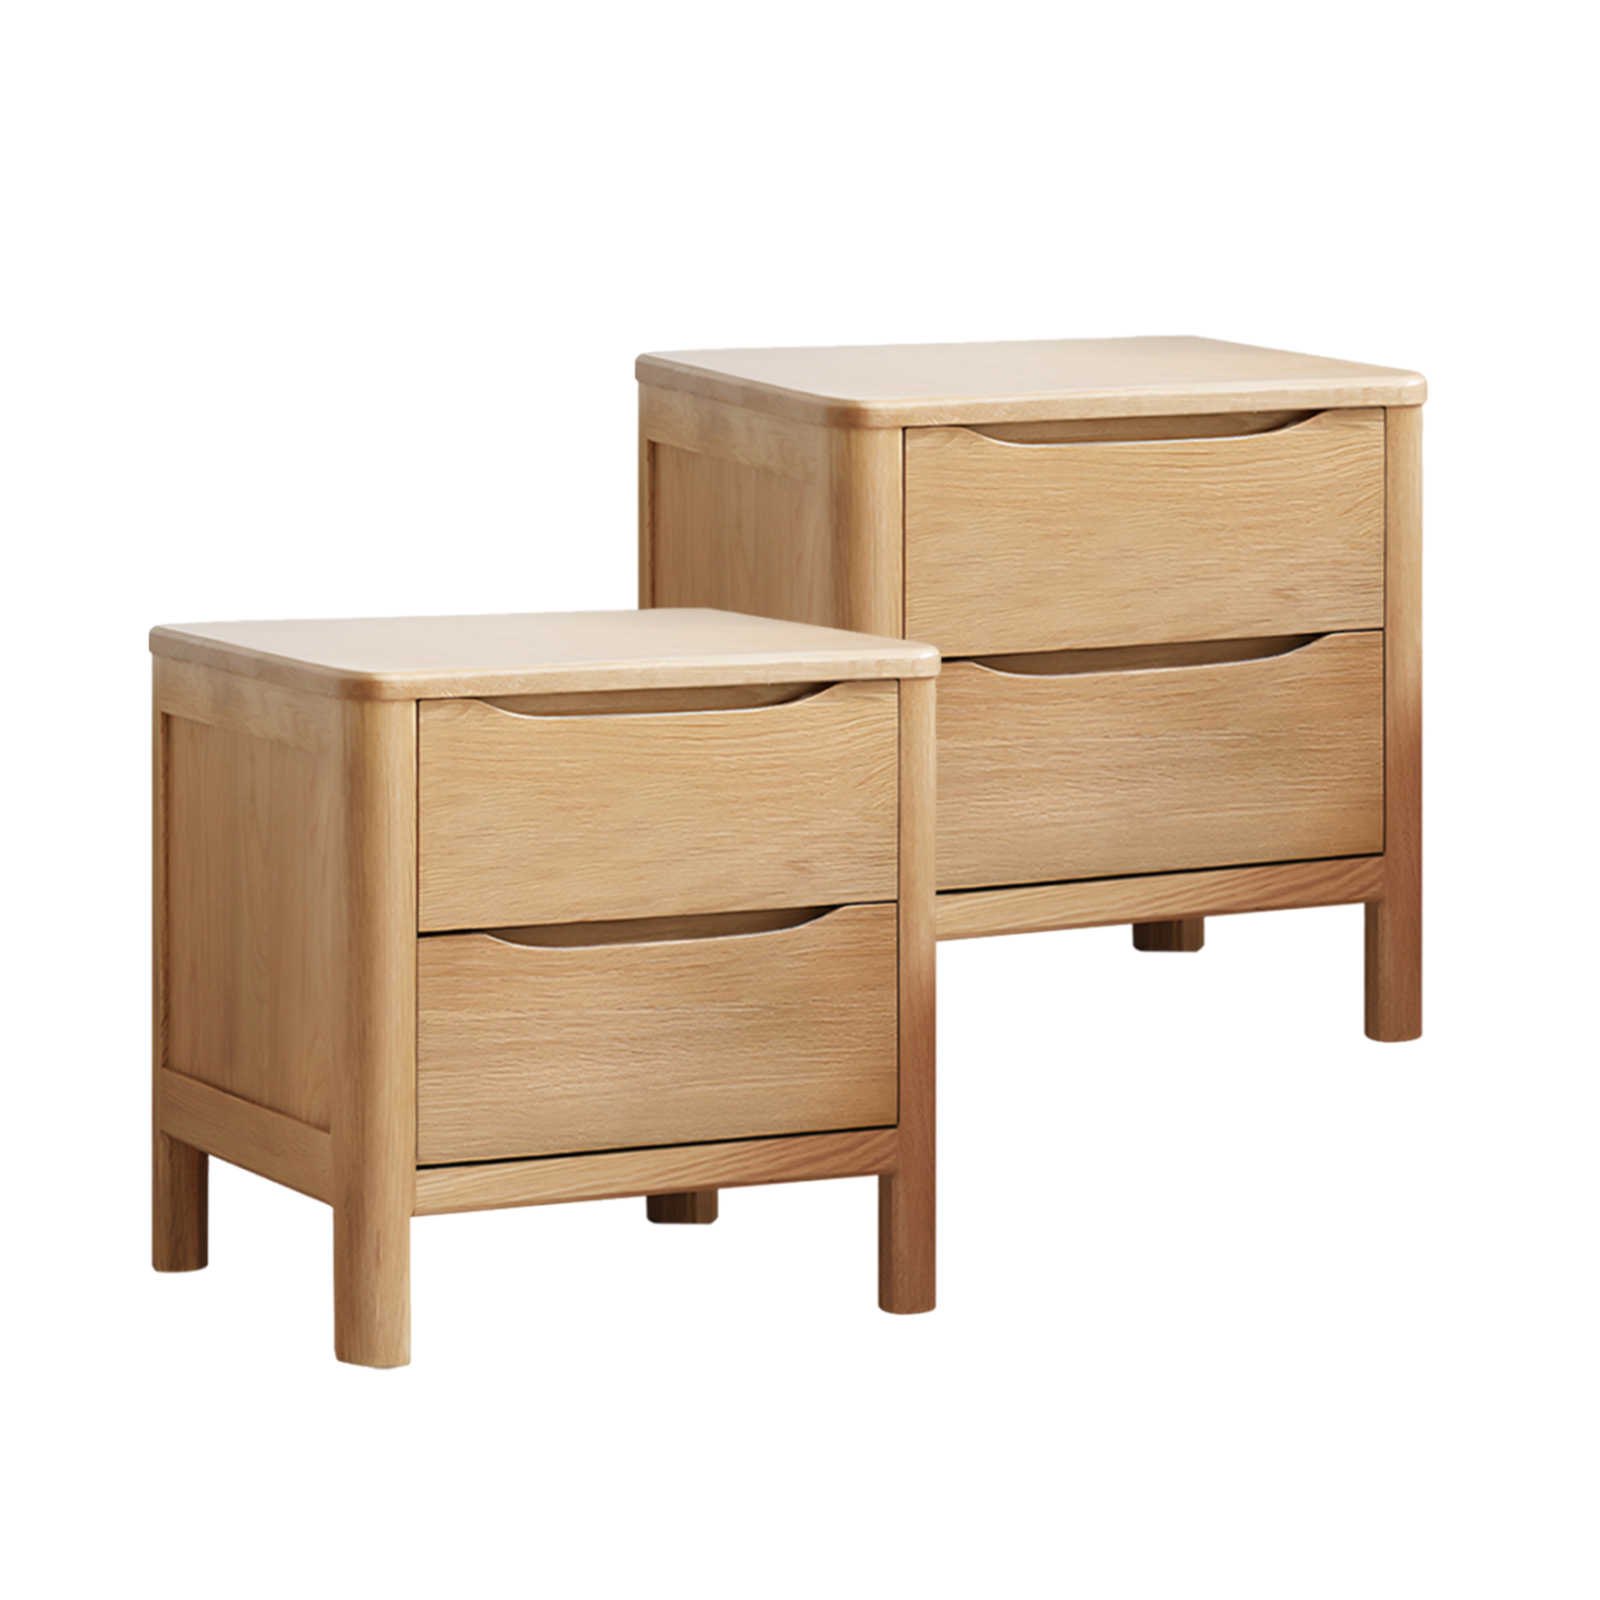 2 x Bedside Table 2 Drawers Side Table Nightstand Storage Solid Oak Wood